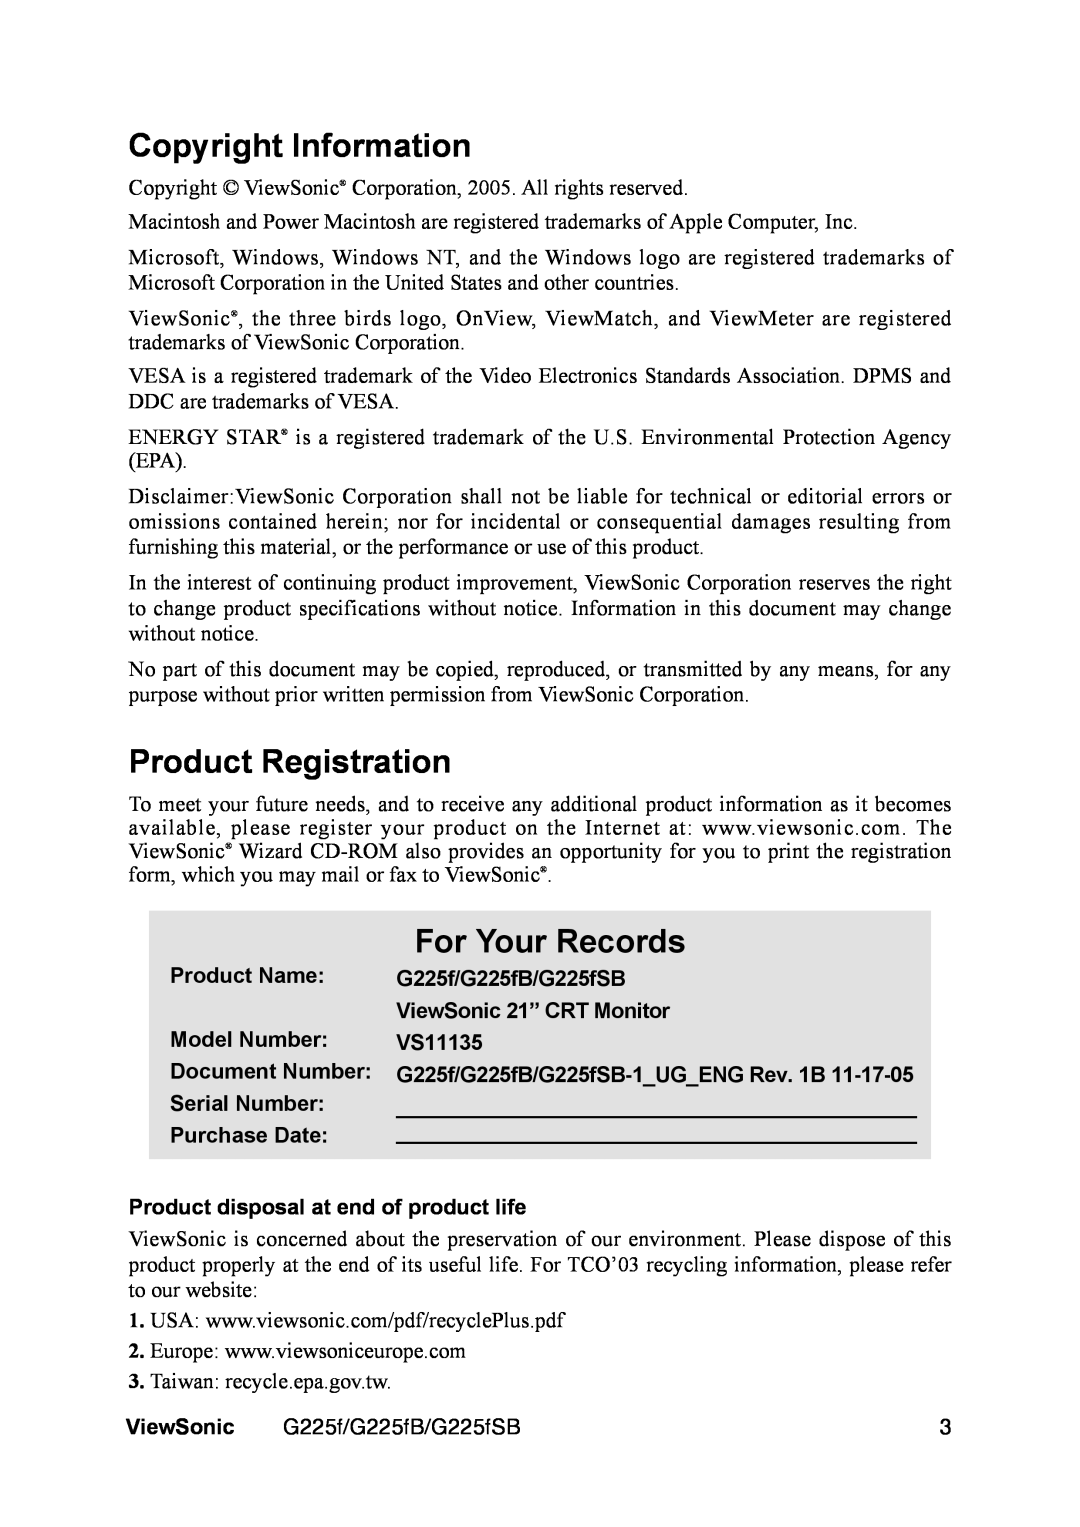 ViewSonic G225F Copyright Information, Product Registration, For Your Records, Product Name, G225f/G225fB/G225fSB, VS11135 